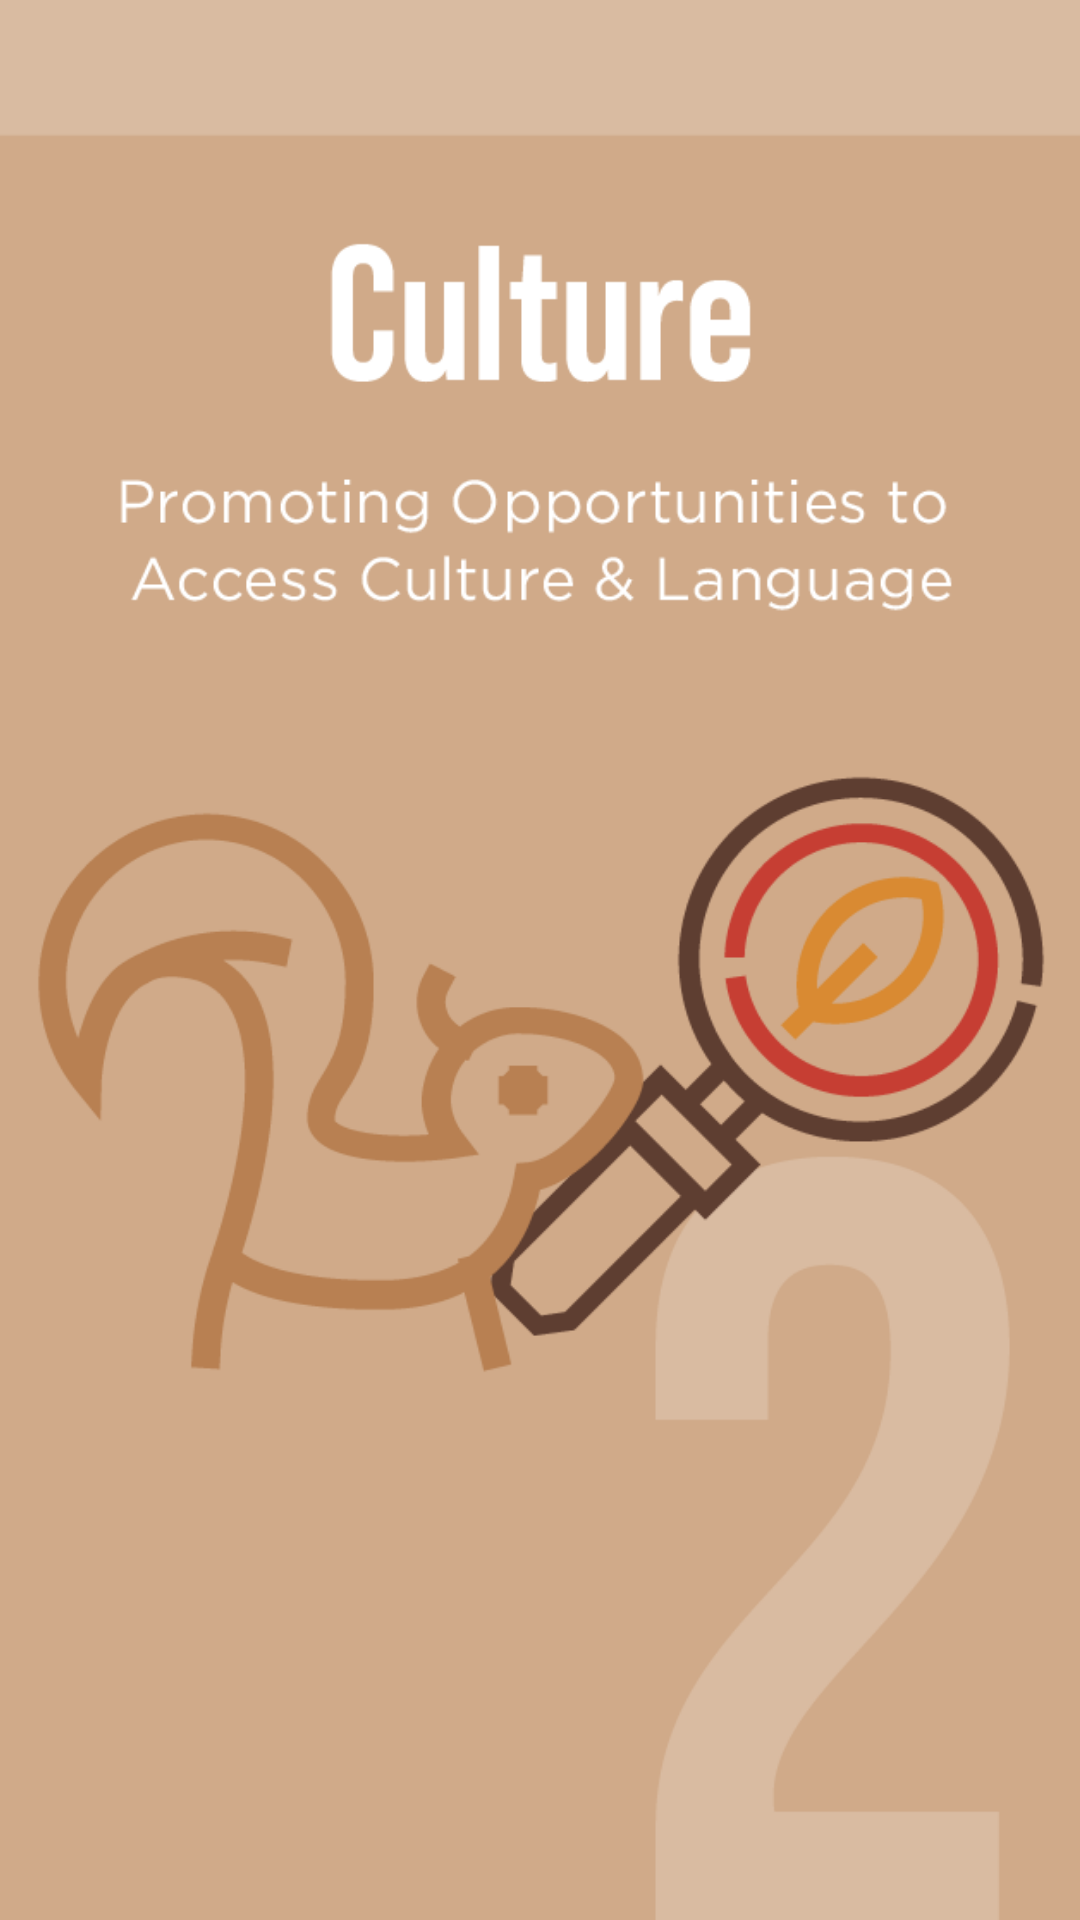 Culture - Promoting opportunities to access culture & language